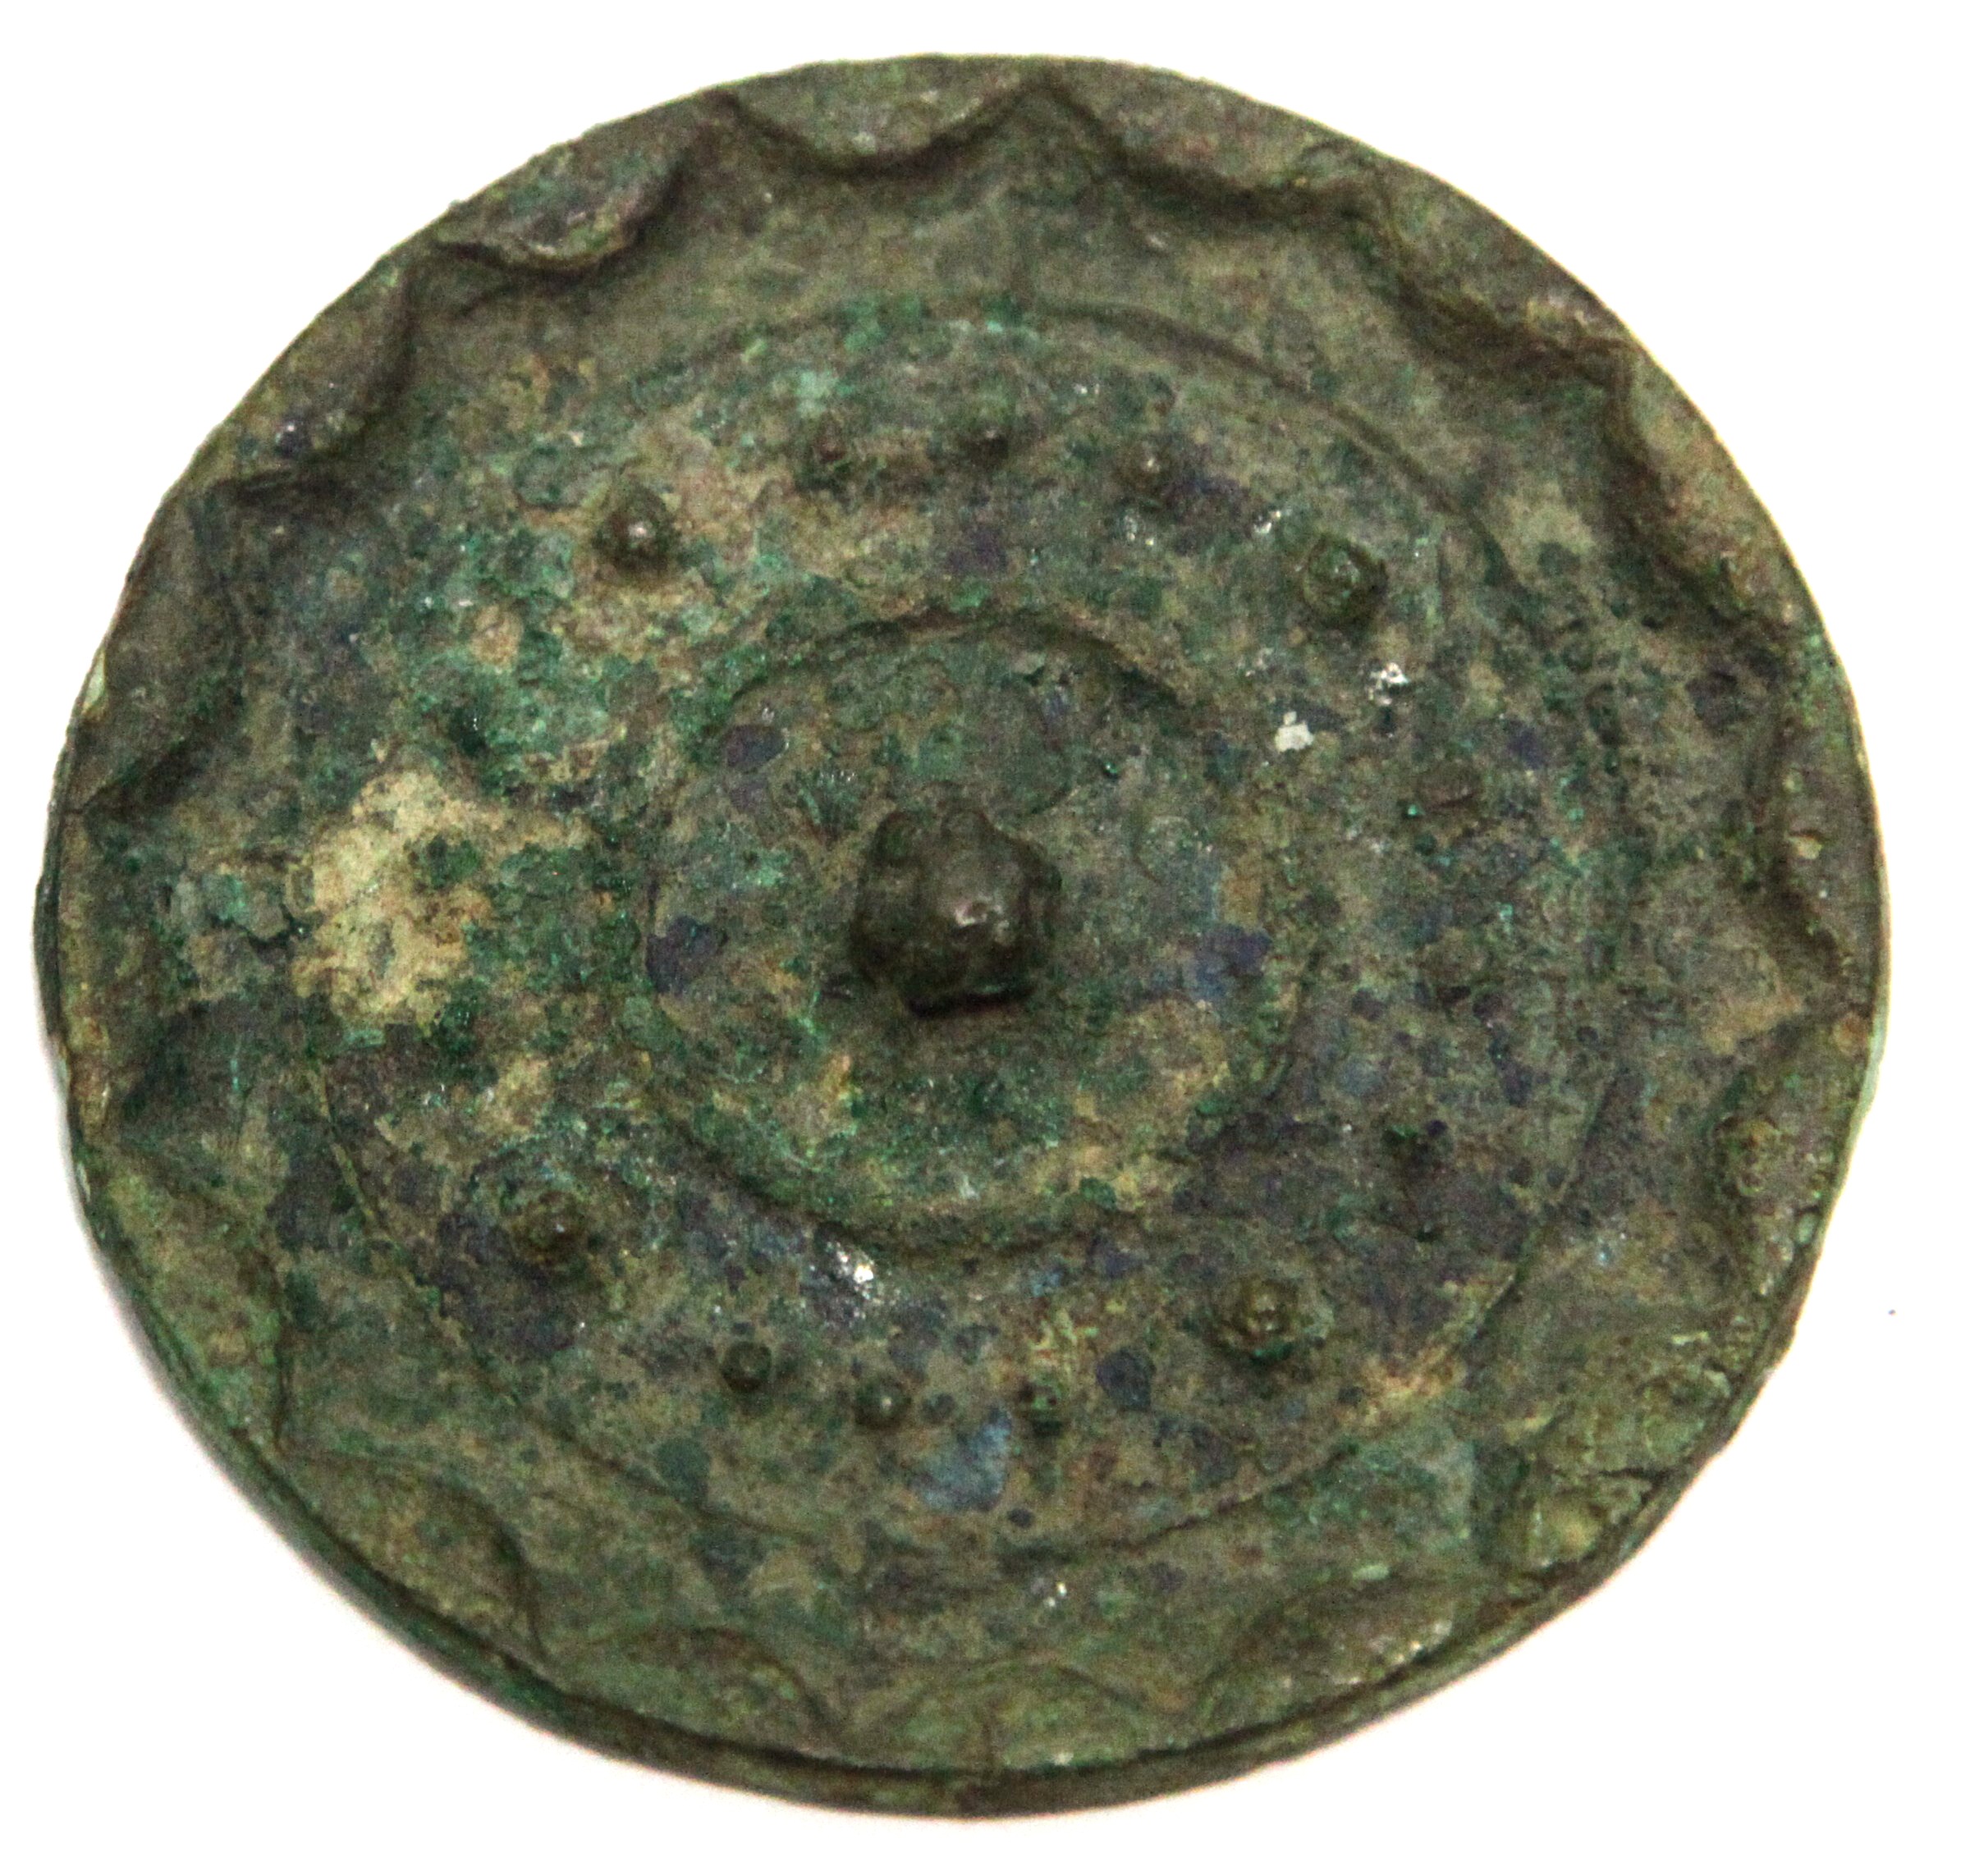 A4011, Bronze Mirror with Stars, China Han Dynasry, AD 300